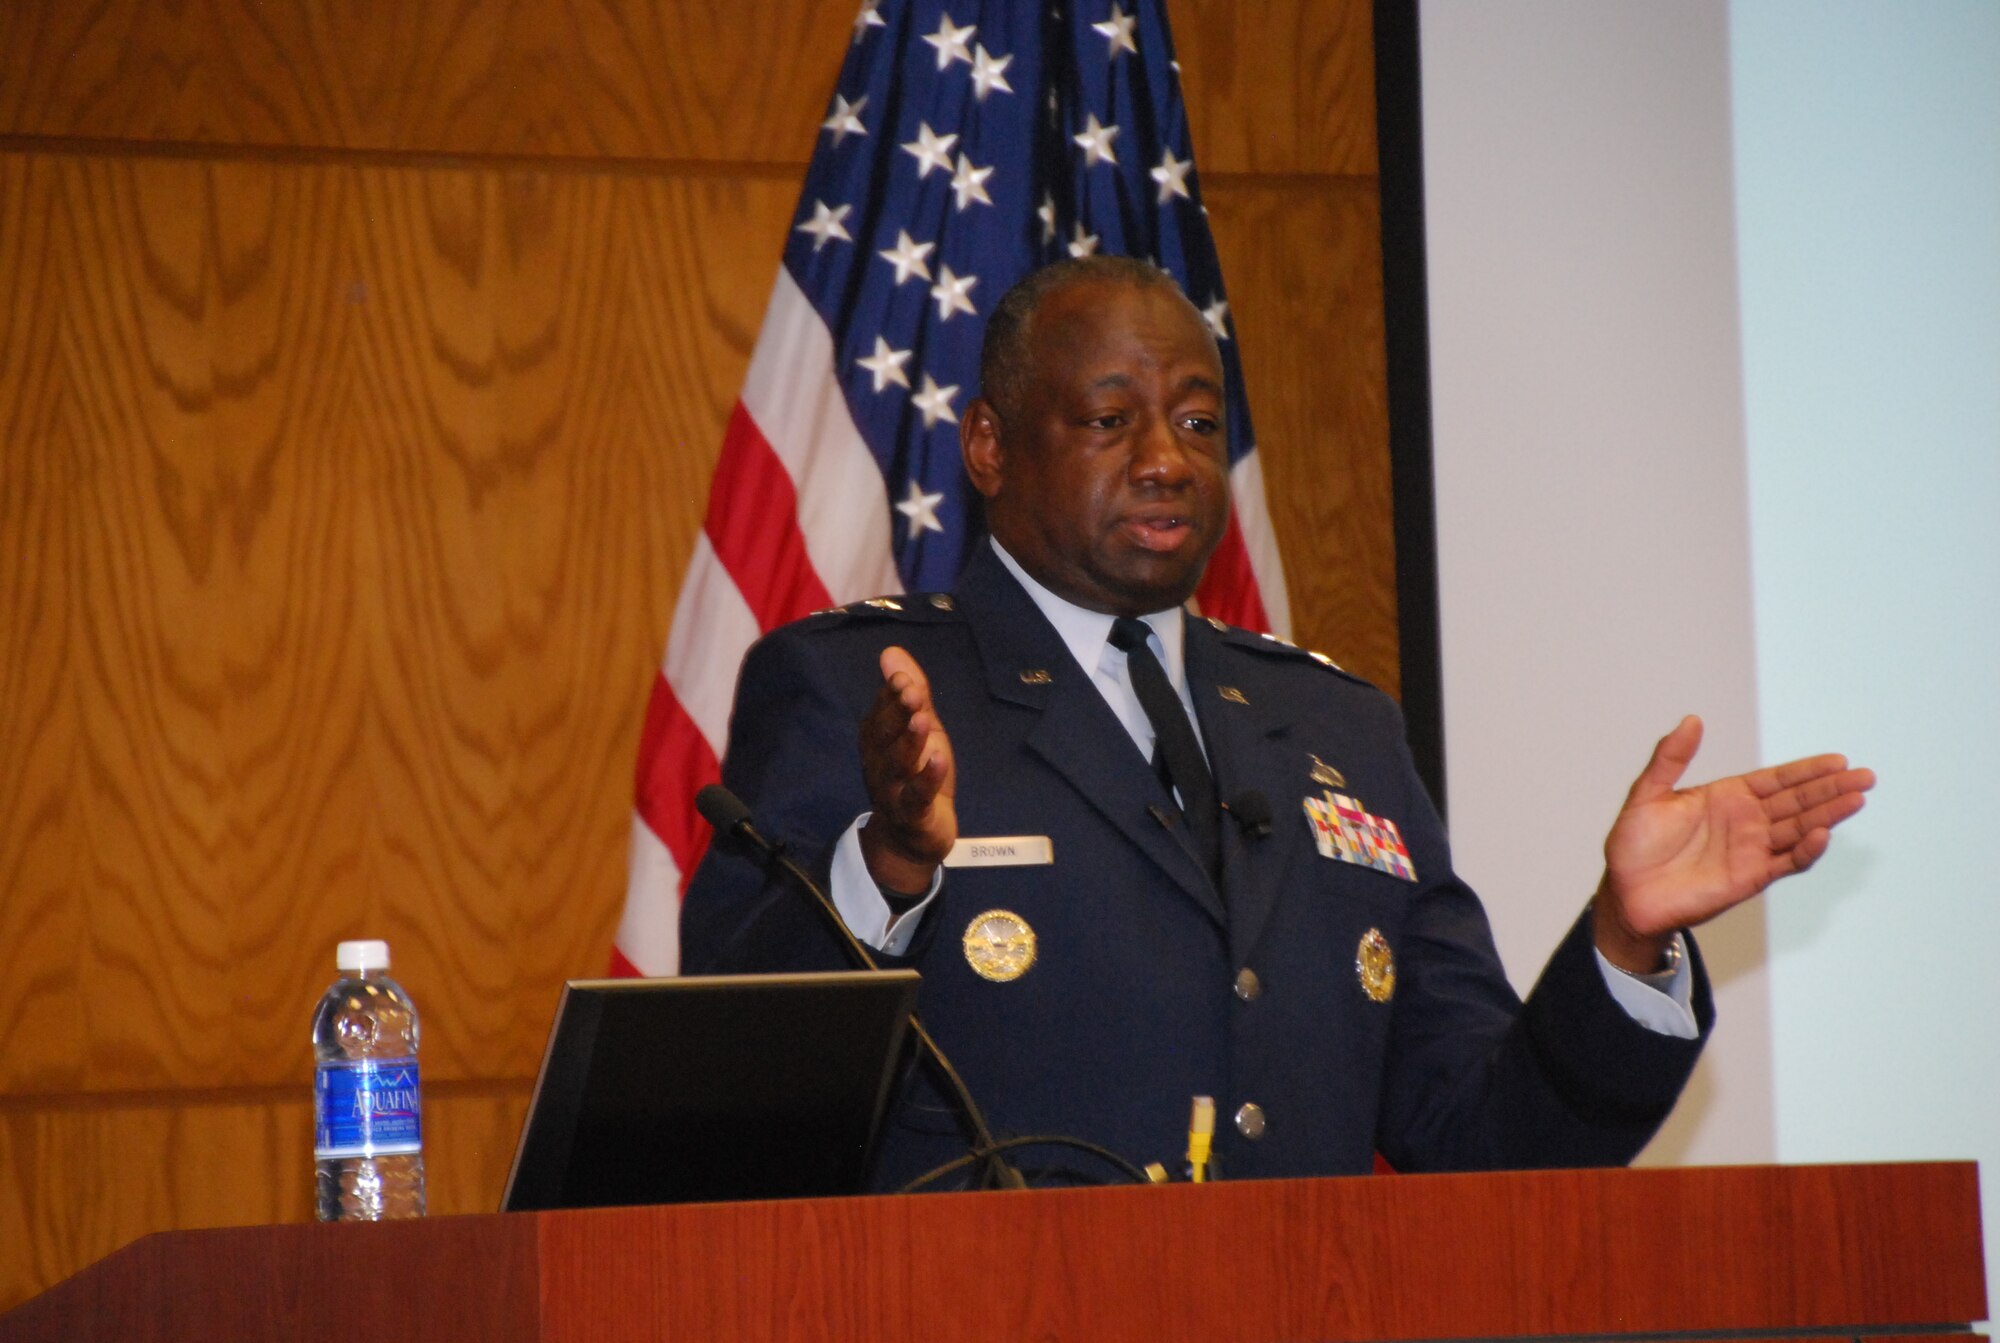 Maj. Gen. Mark Brown visited Defense Finance and Accounting Service headquarters in Indianapolis, Sept. 16, 2015, during the agency’s annual business meeting to speak about 21st century Airmen and how DFAS could help service today’s generation. (Department of Defense photo/Chyenne Adams)